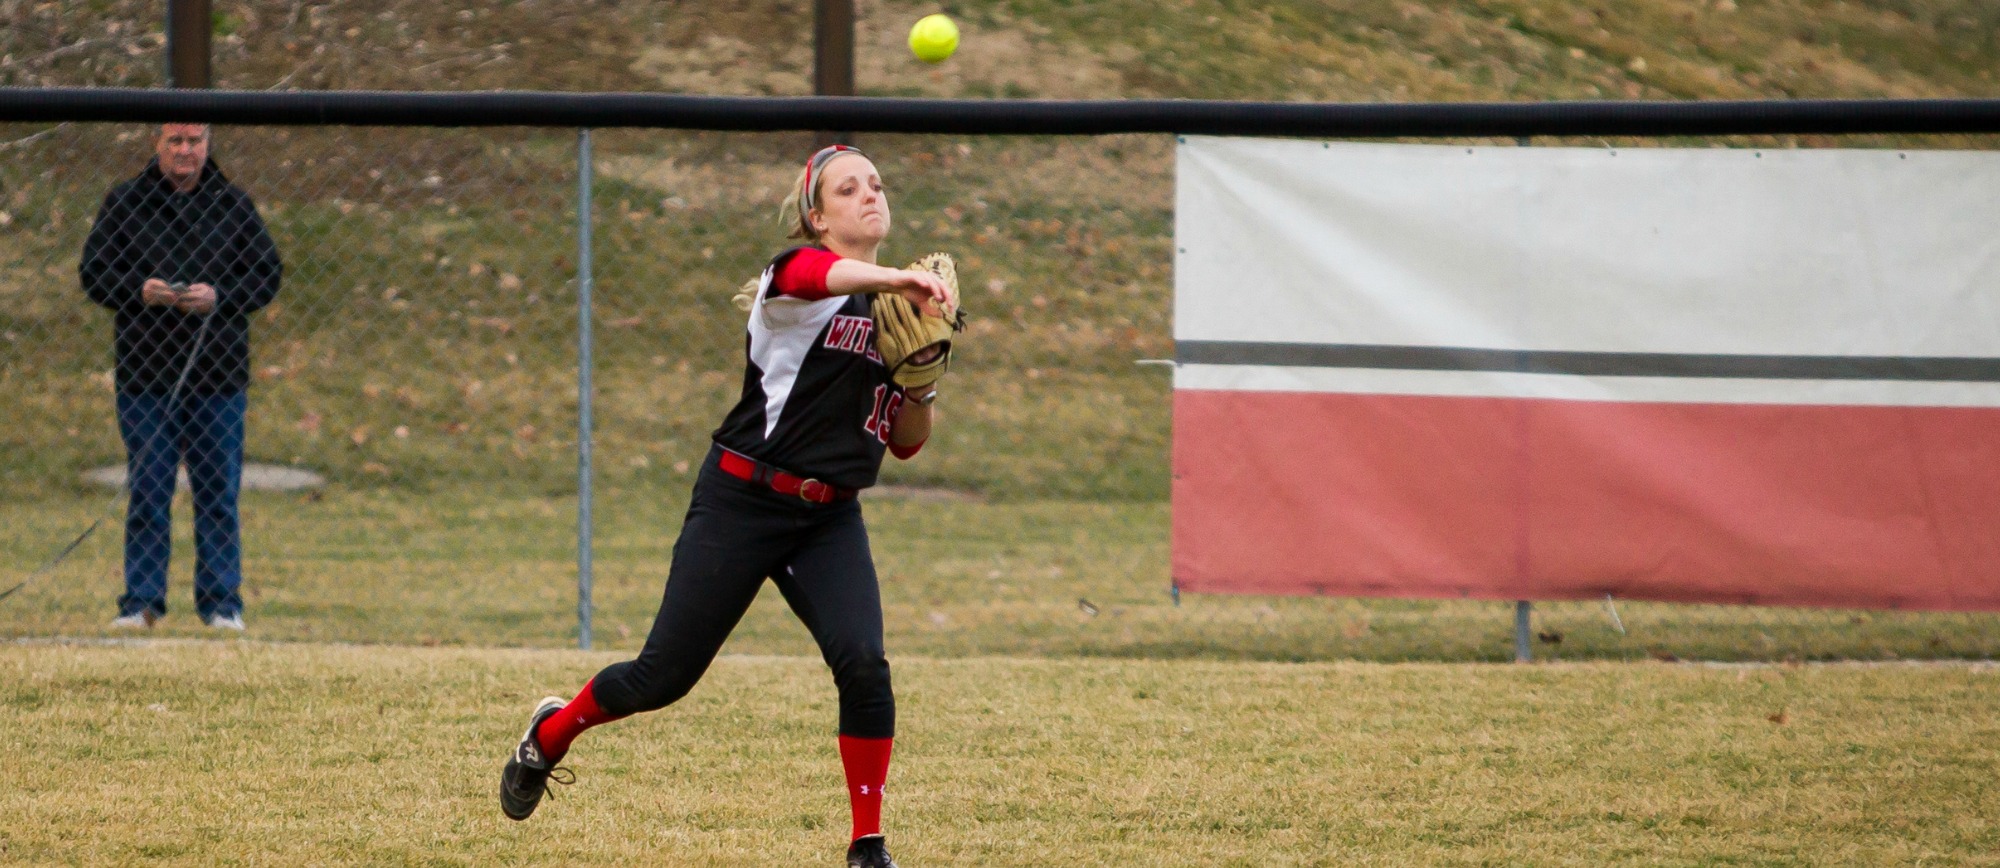 Tiger Softball Reaches 21 Wins with Clean Sweep of Kenyon